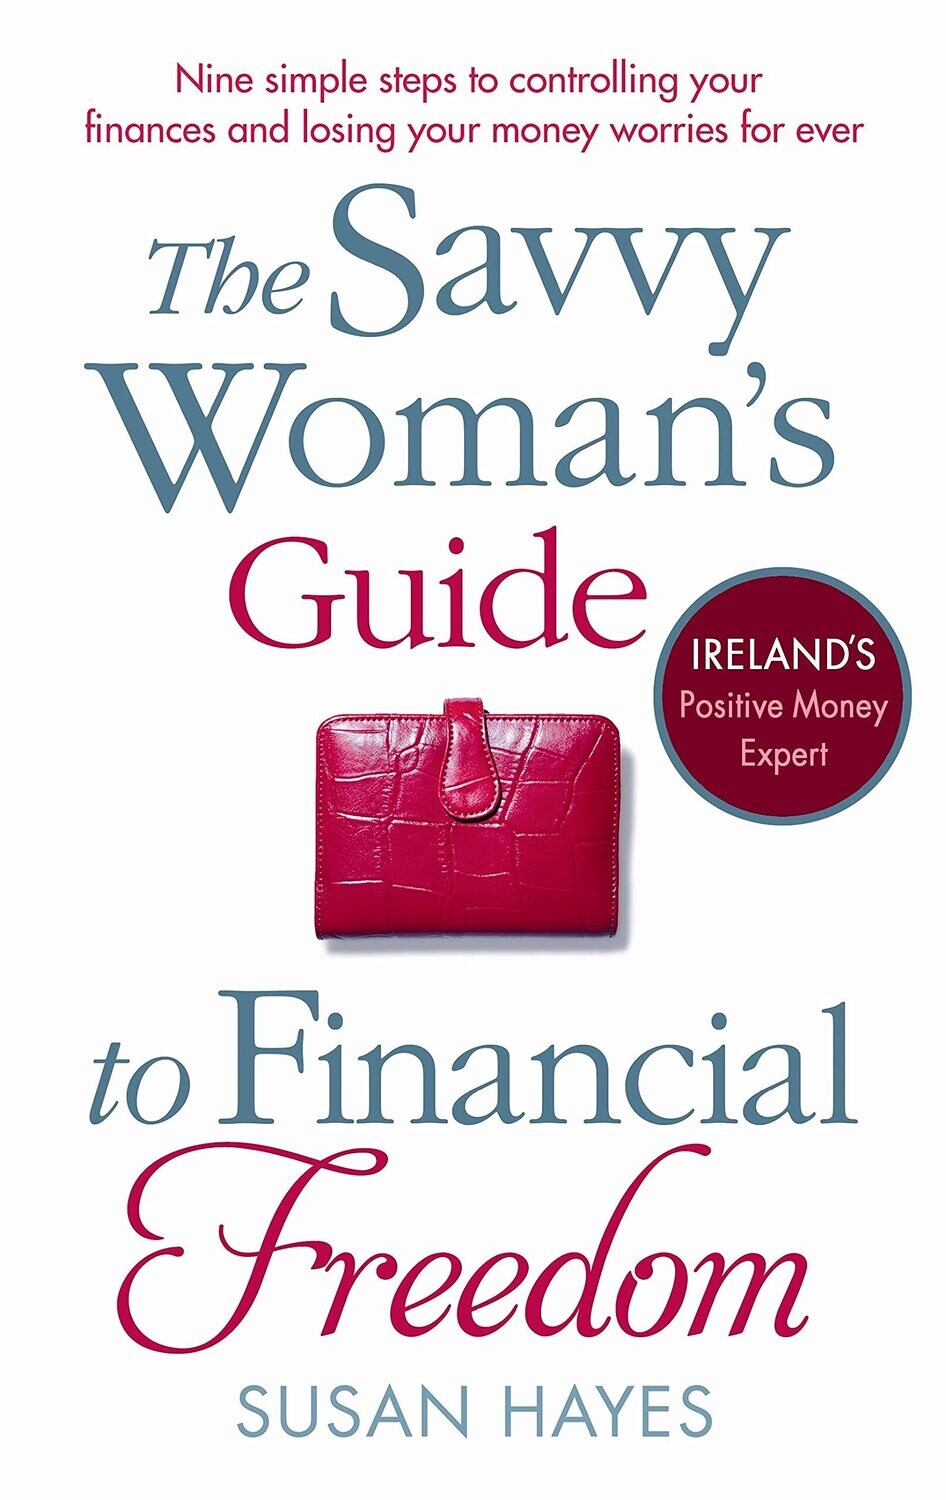 The Savvy Women's Guide to Financial Freedom